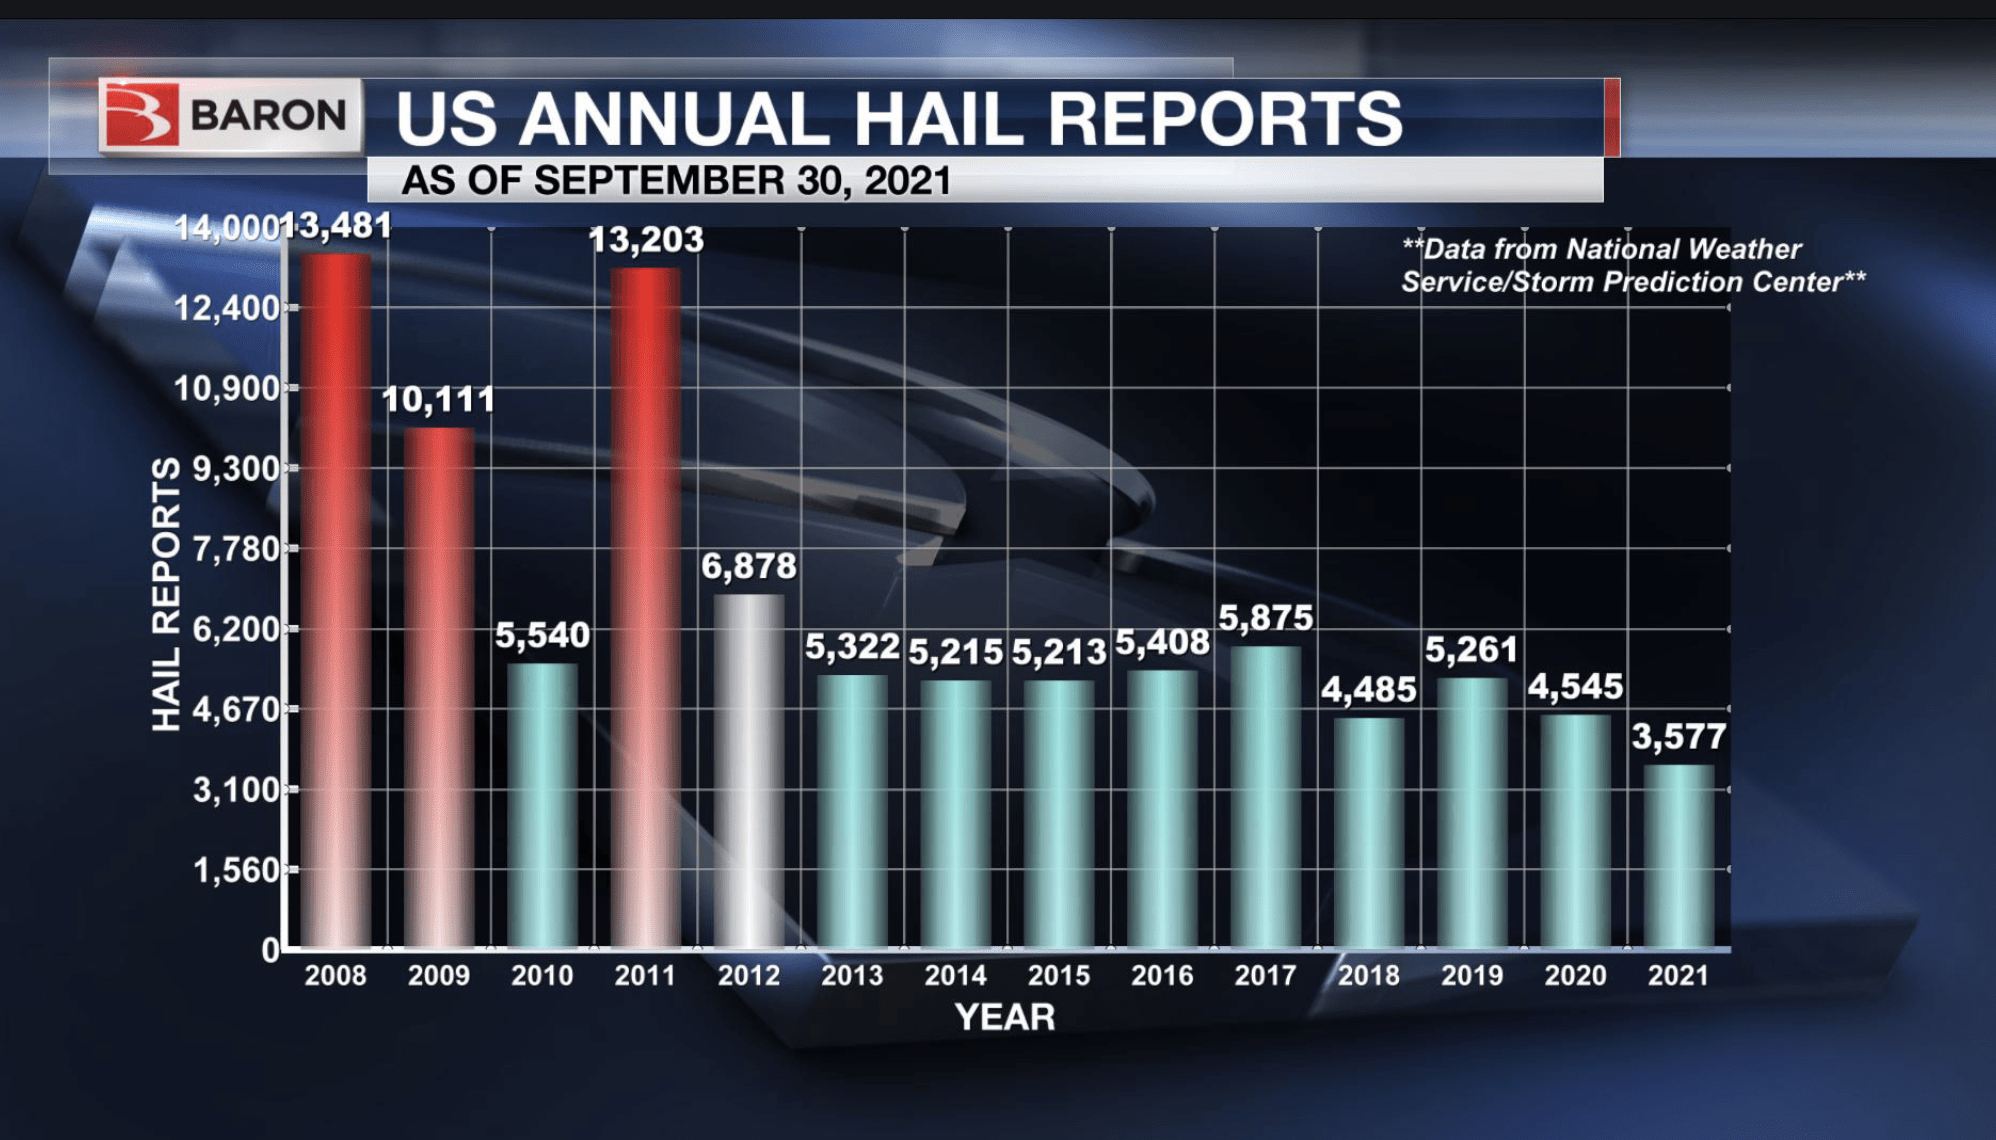 hail statistics from the past 13 years as reported to the Storm Prediction Center. Image credit: Baron Service